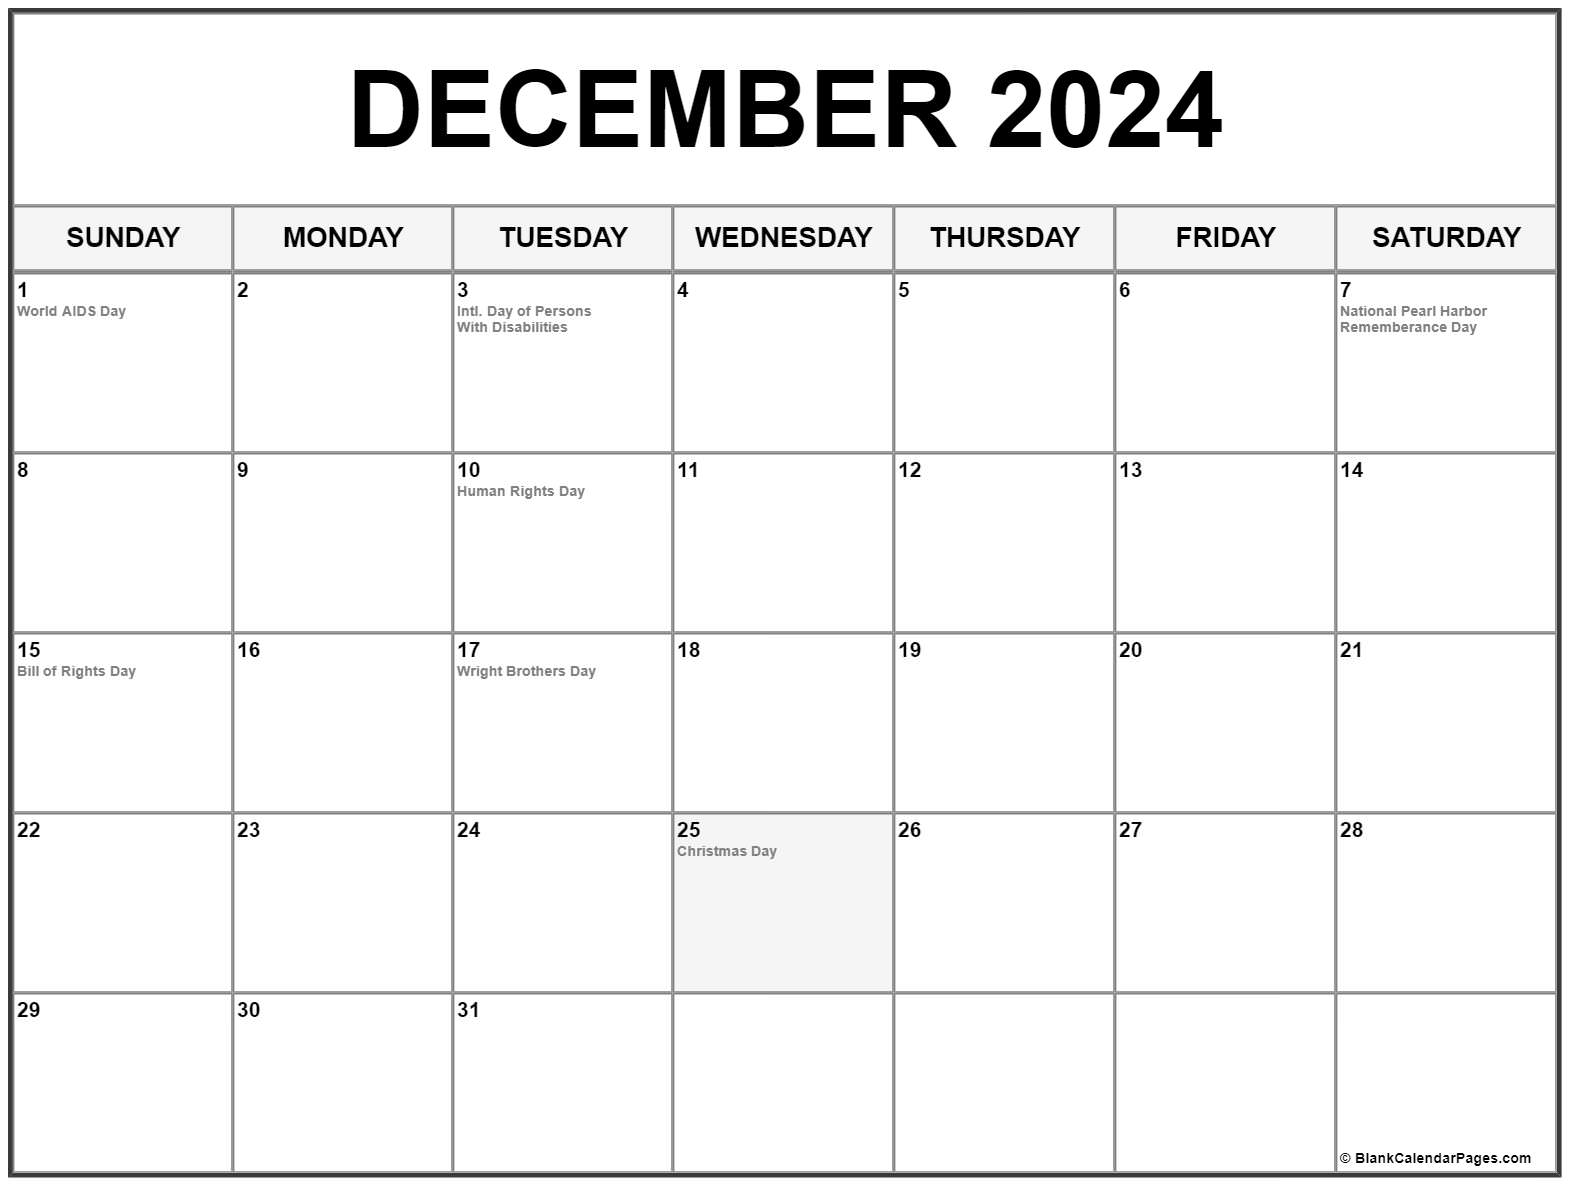 Collection of December 2019 calendars with holidays